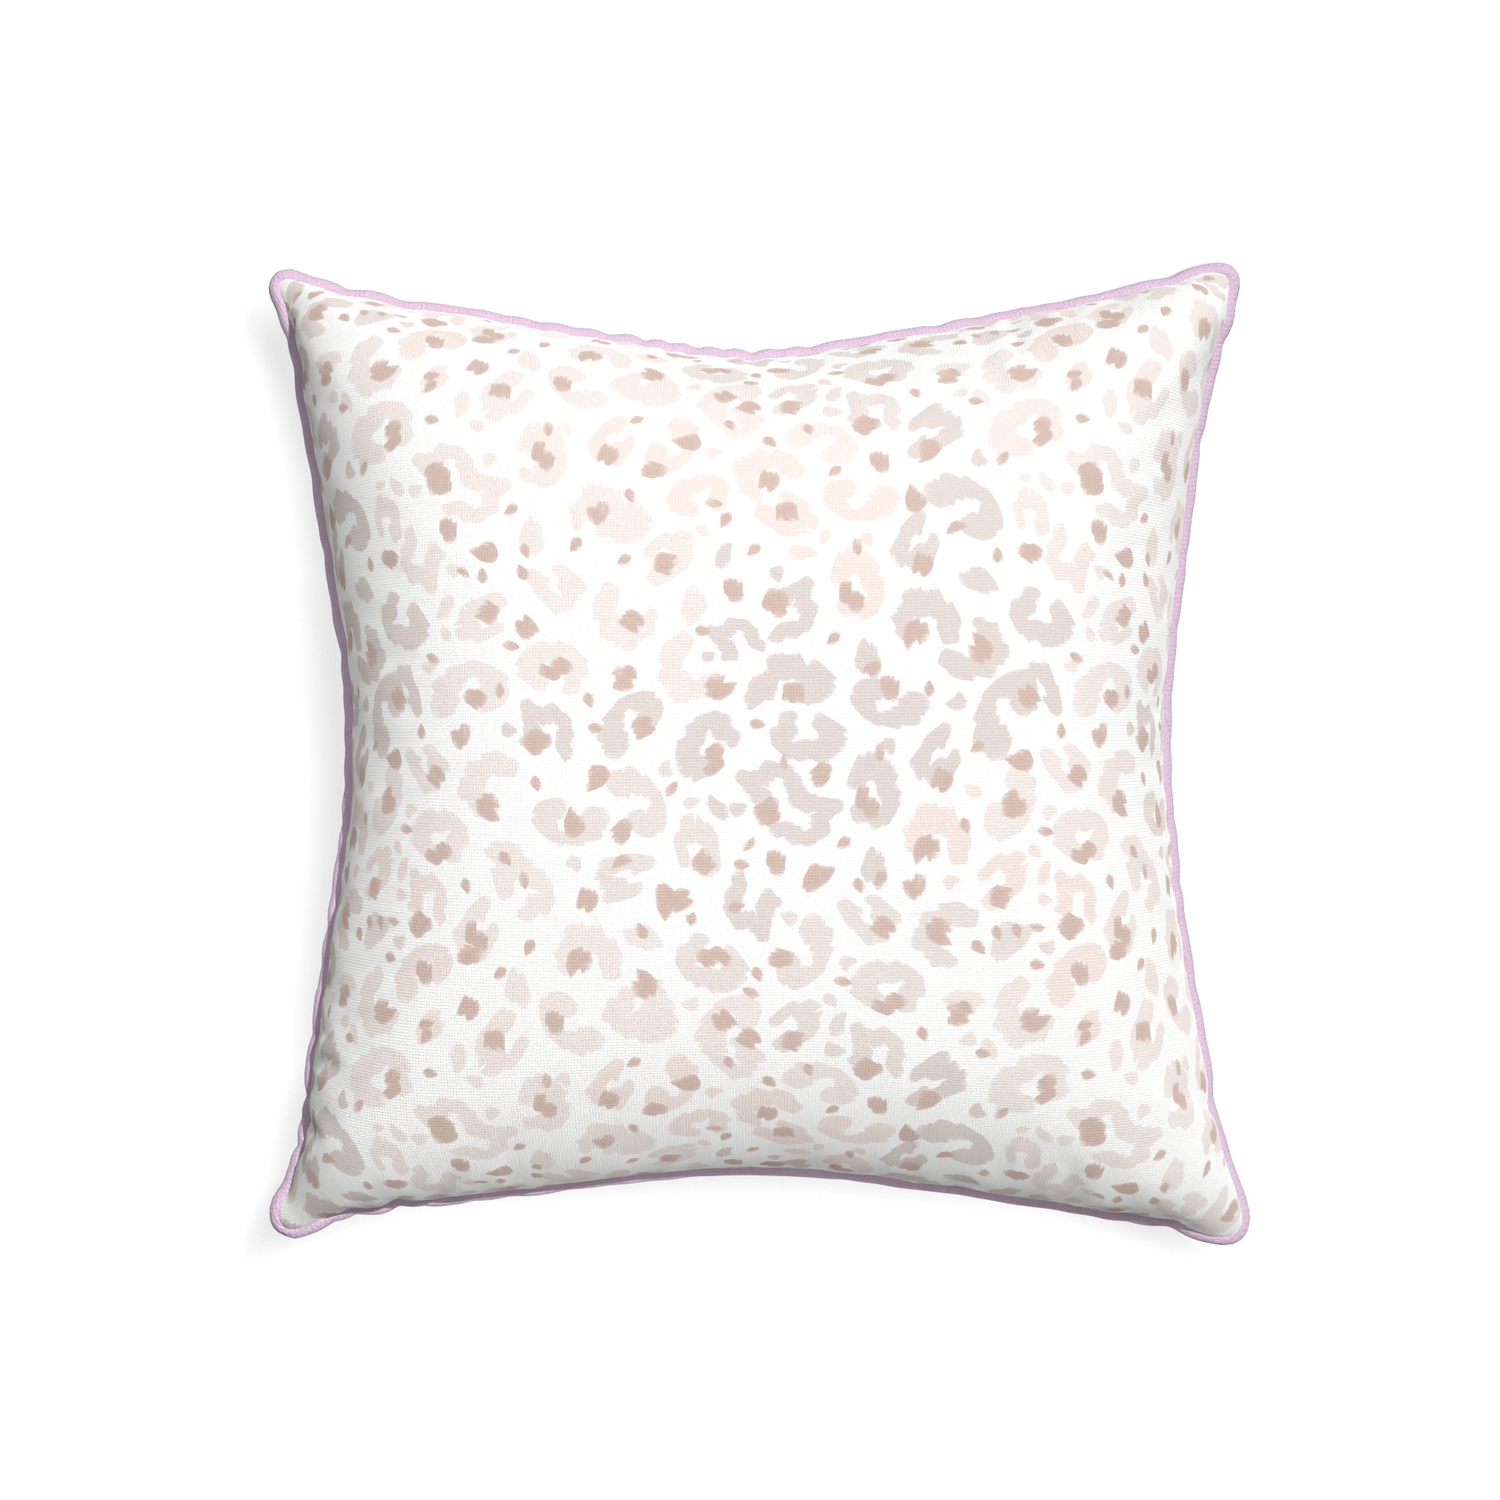 22-square rosie custom pillow with l piping on white background